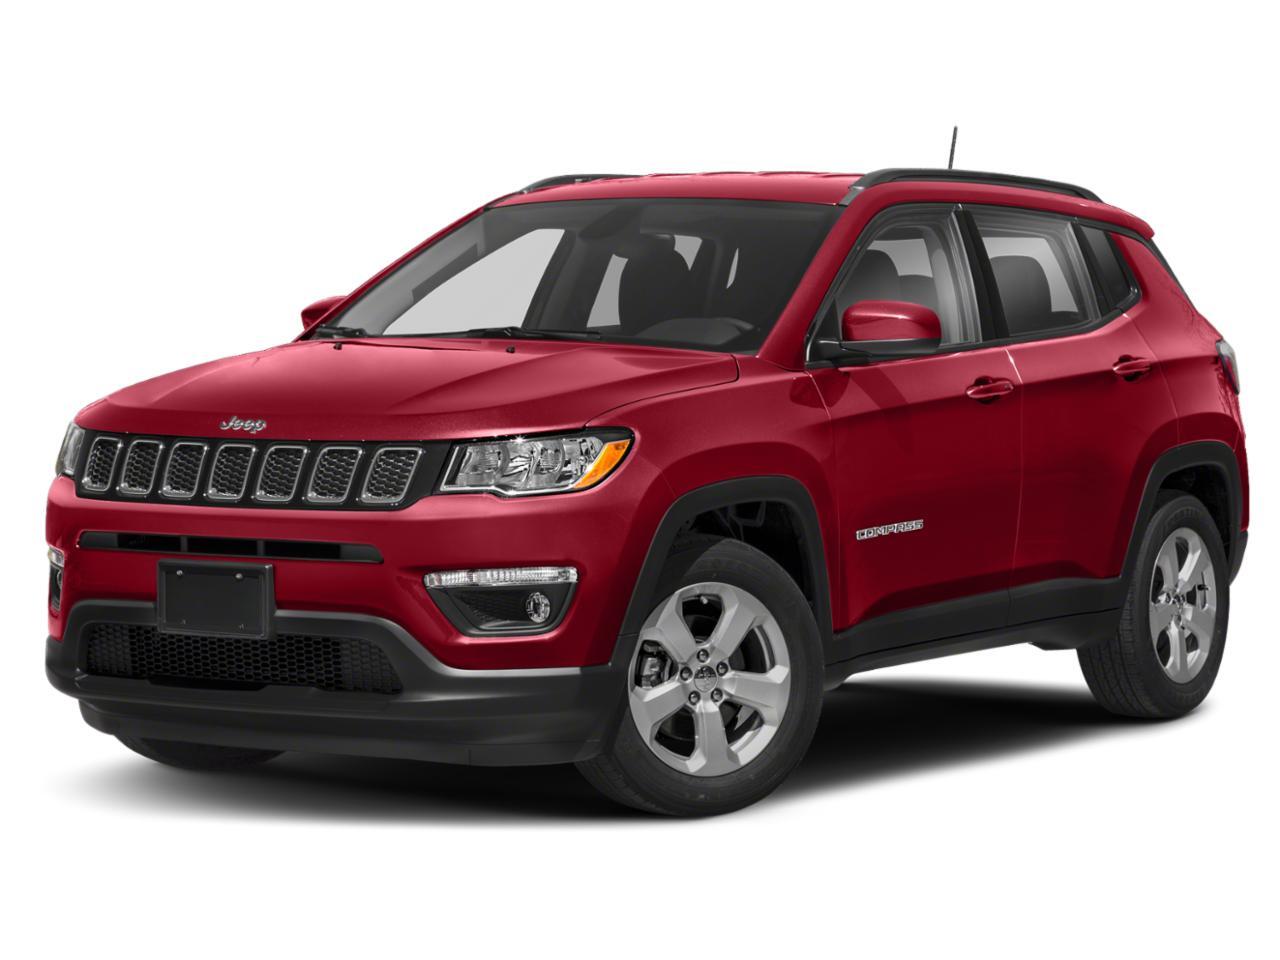 2019 Jeep Compass Sport | Cold Weather Group | CarPlay 4x4